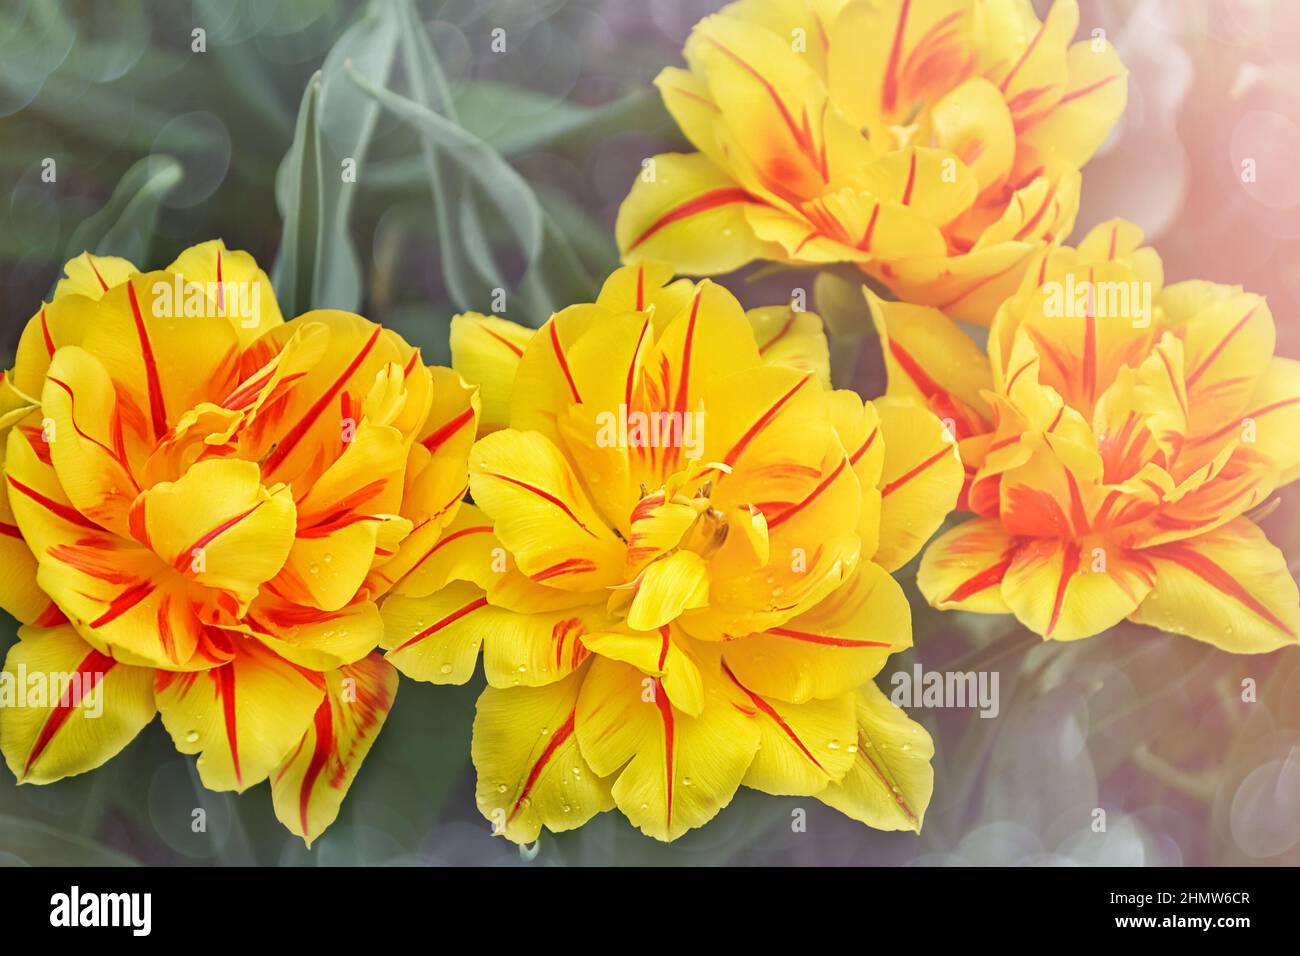 Lush flowering of yellow tulips with red stripes on a defocused natural background, close-up. Spring concept Stock Photo